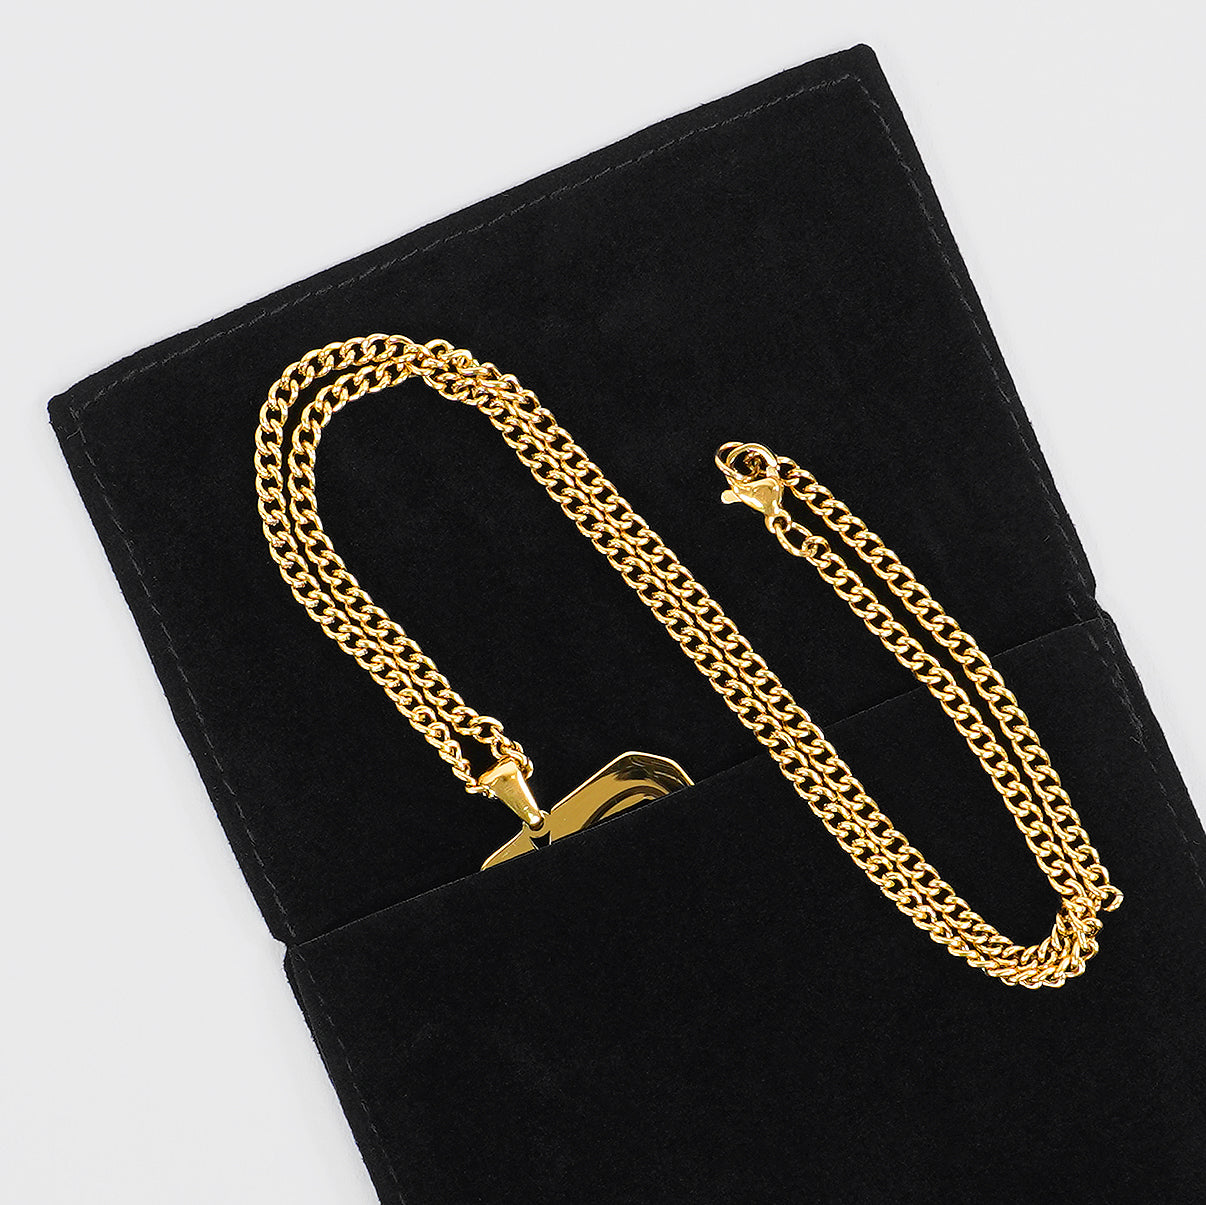 64 Number Pendant with Chain Necklace - Gold Plated Stainless Steel